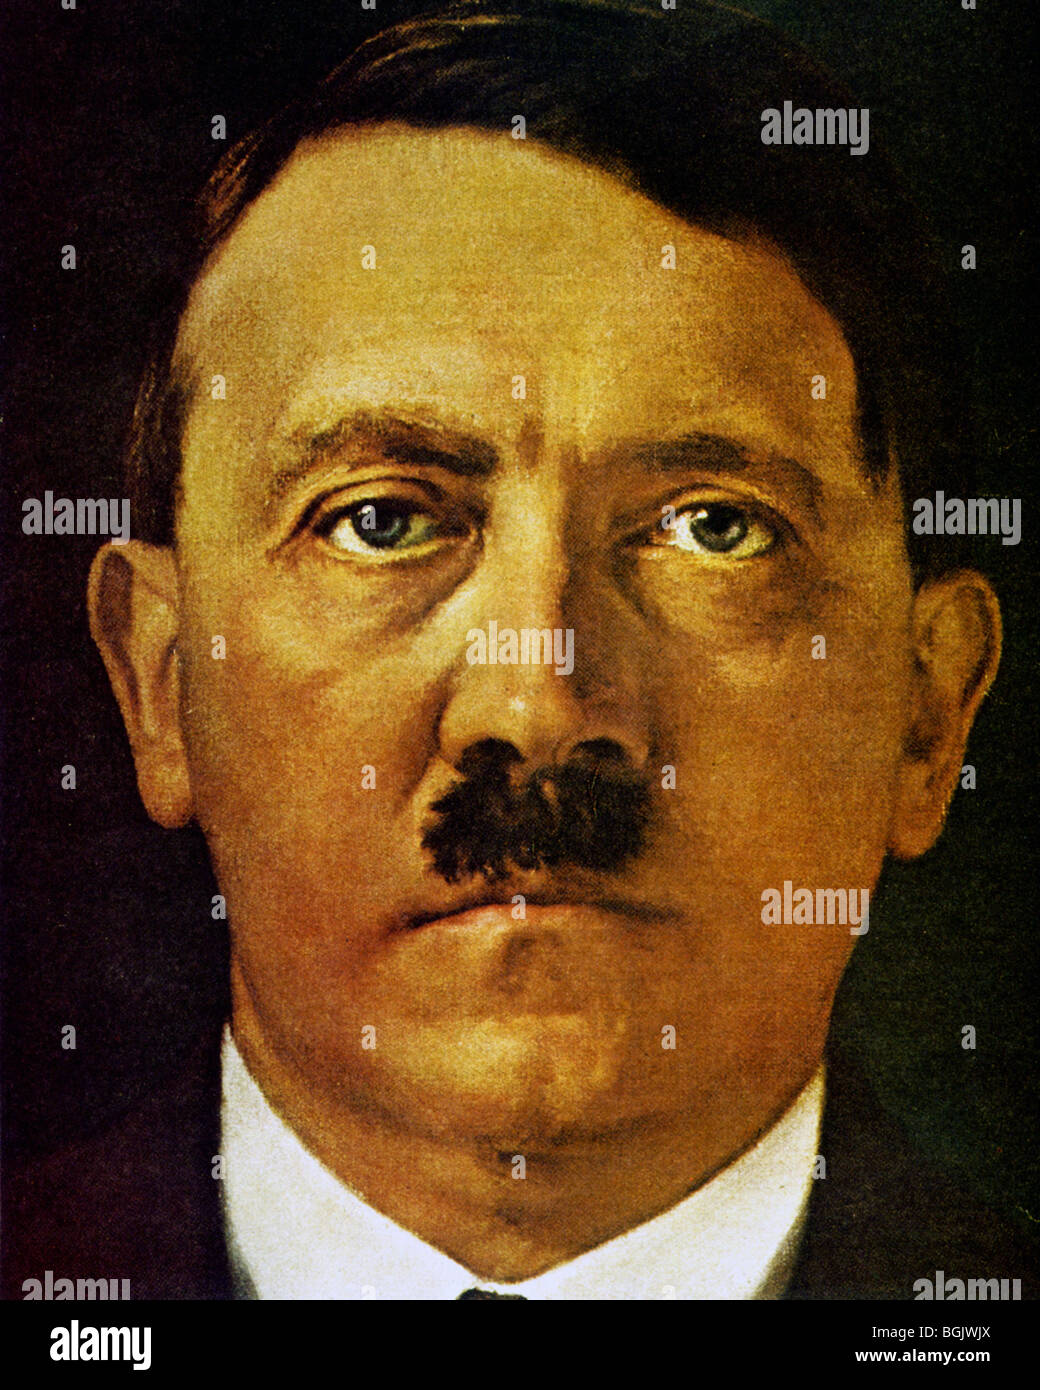 Hitler Moustache High Resolution Stock Photography and Images - Alamy